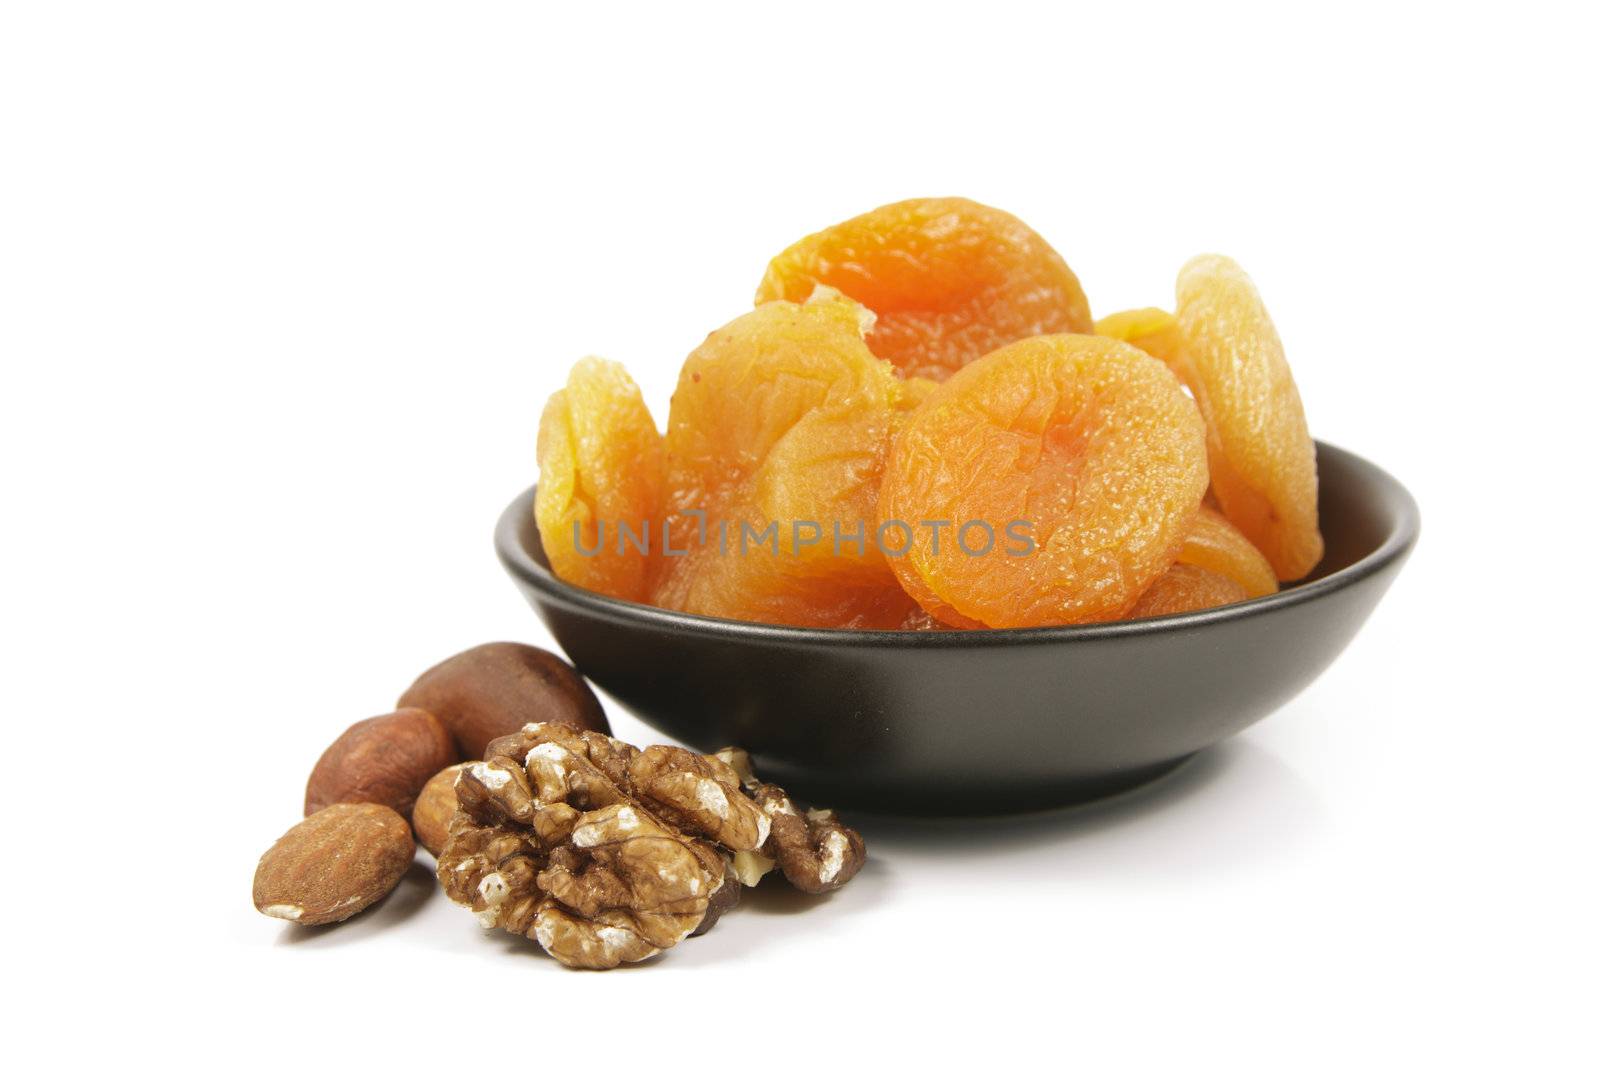 Dried Apricots and Nuts by KeithWilson